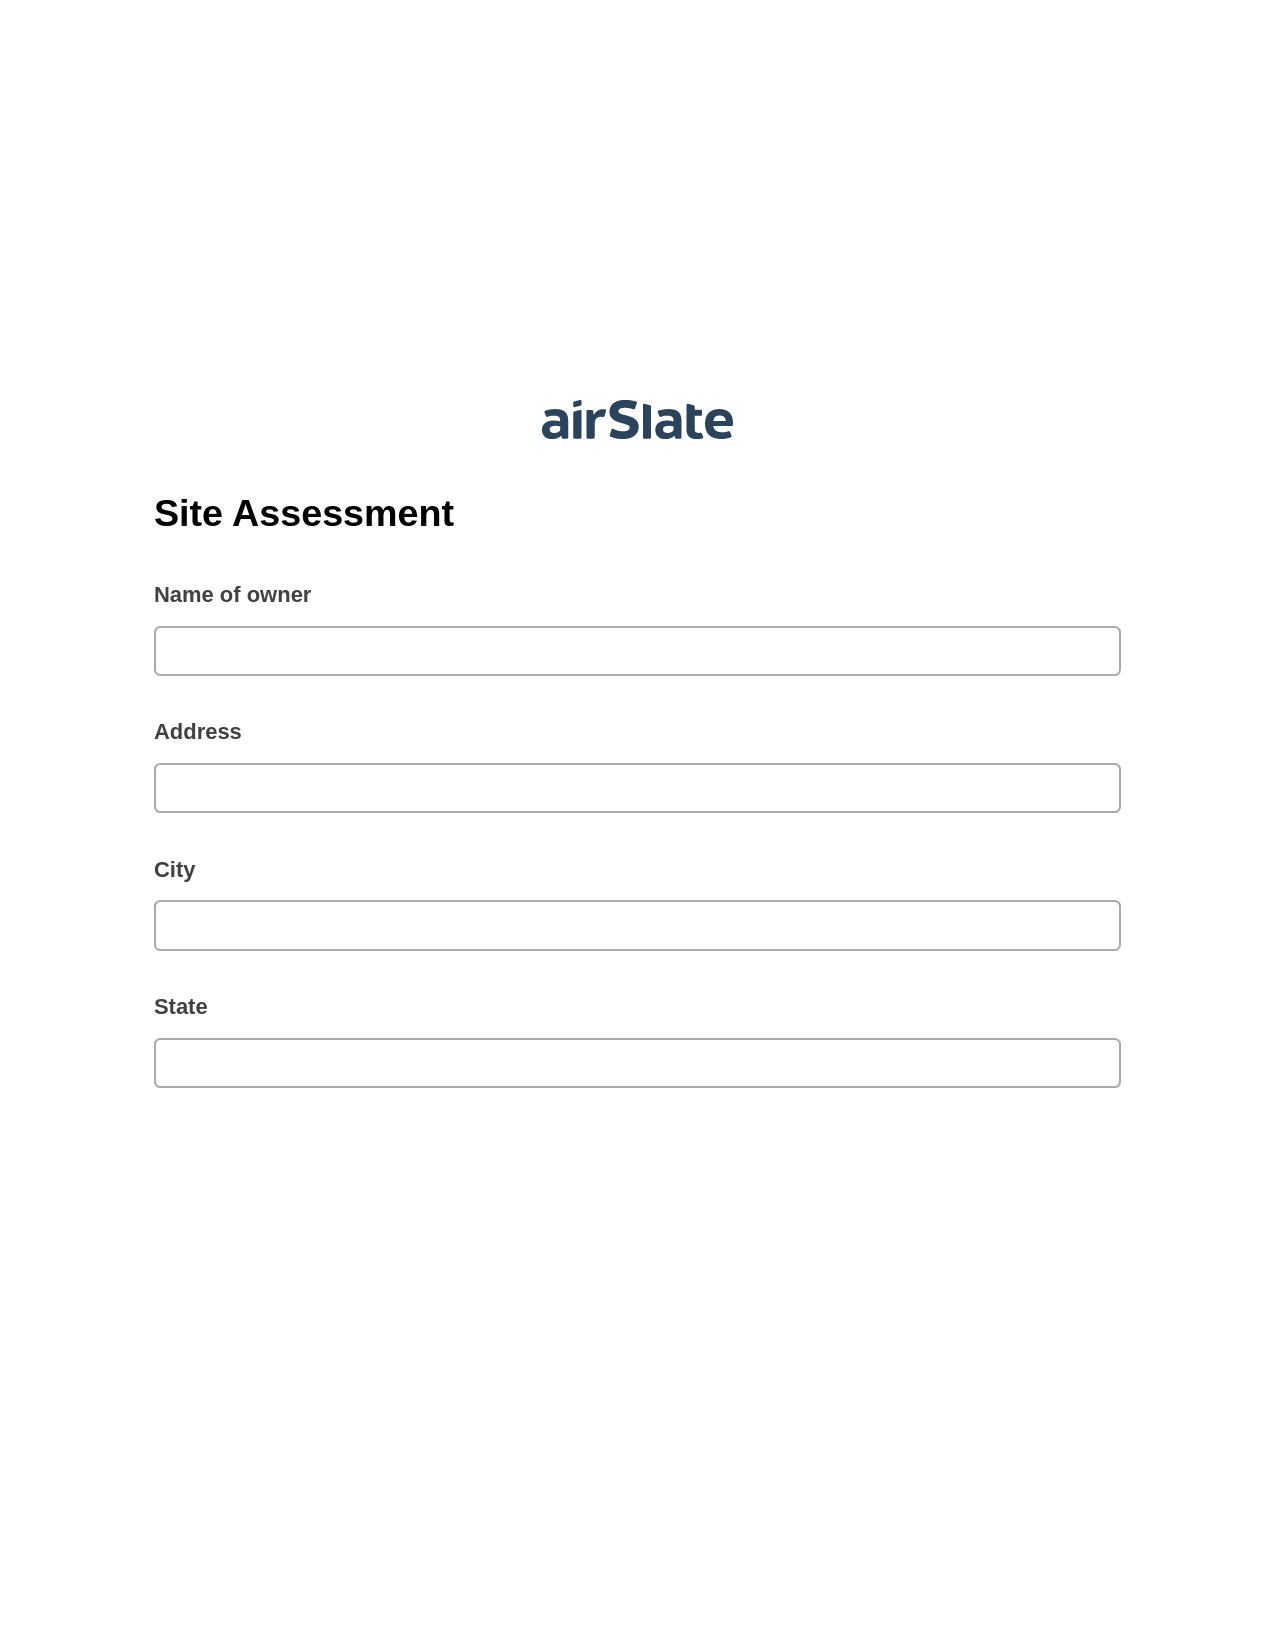 Site Assessment Pre-fill from CSV File Bot, Webhook Bot, Export to Salesforce Bot